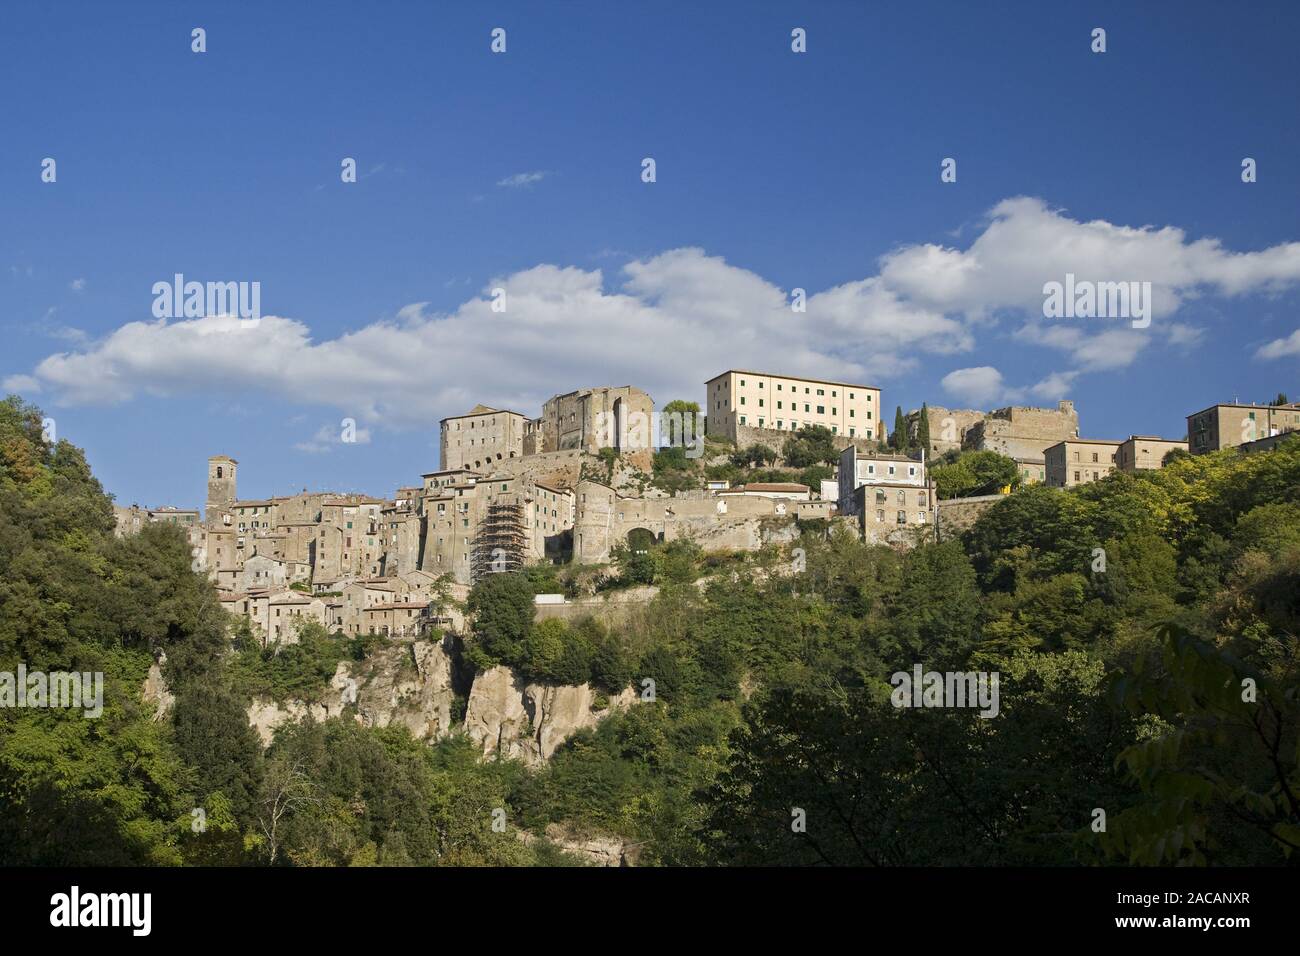 Sorano Tuscany High Resolution Stock Photography and Images - Alamy